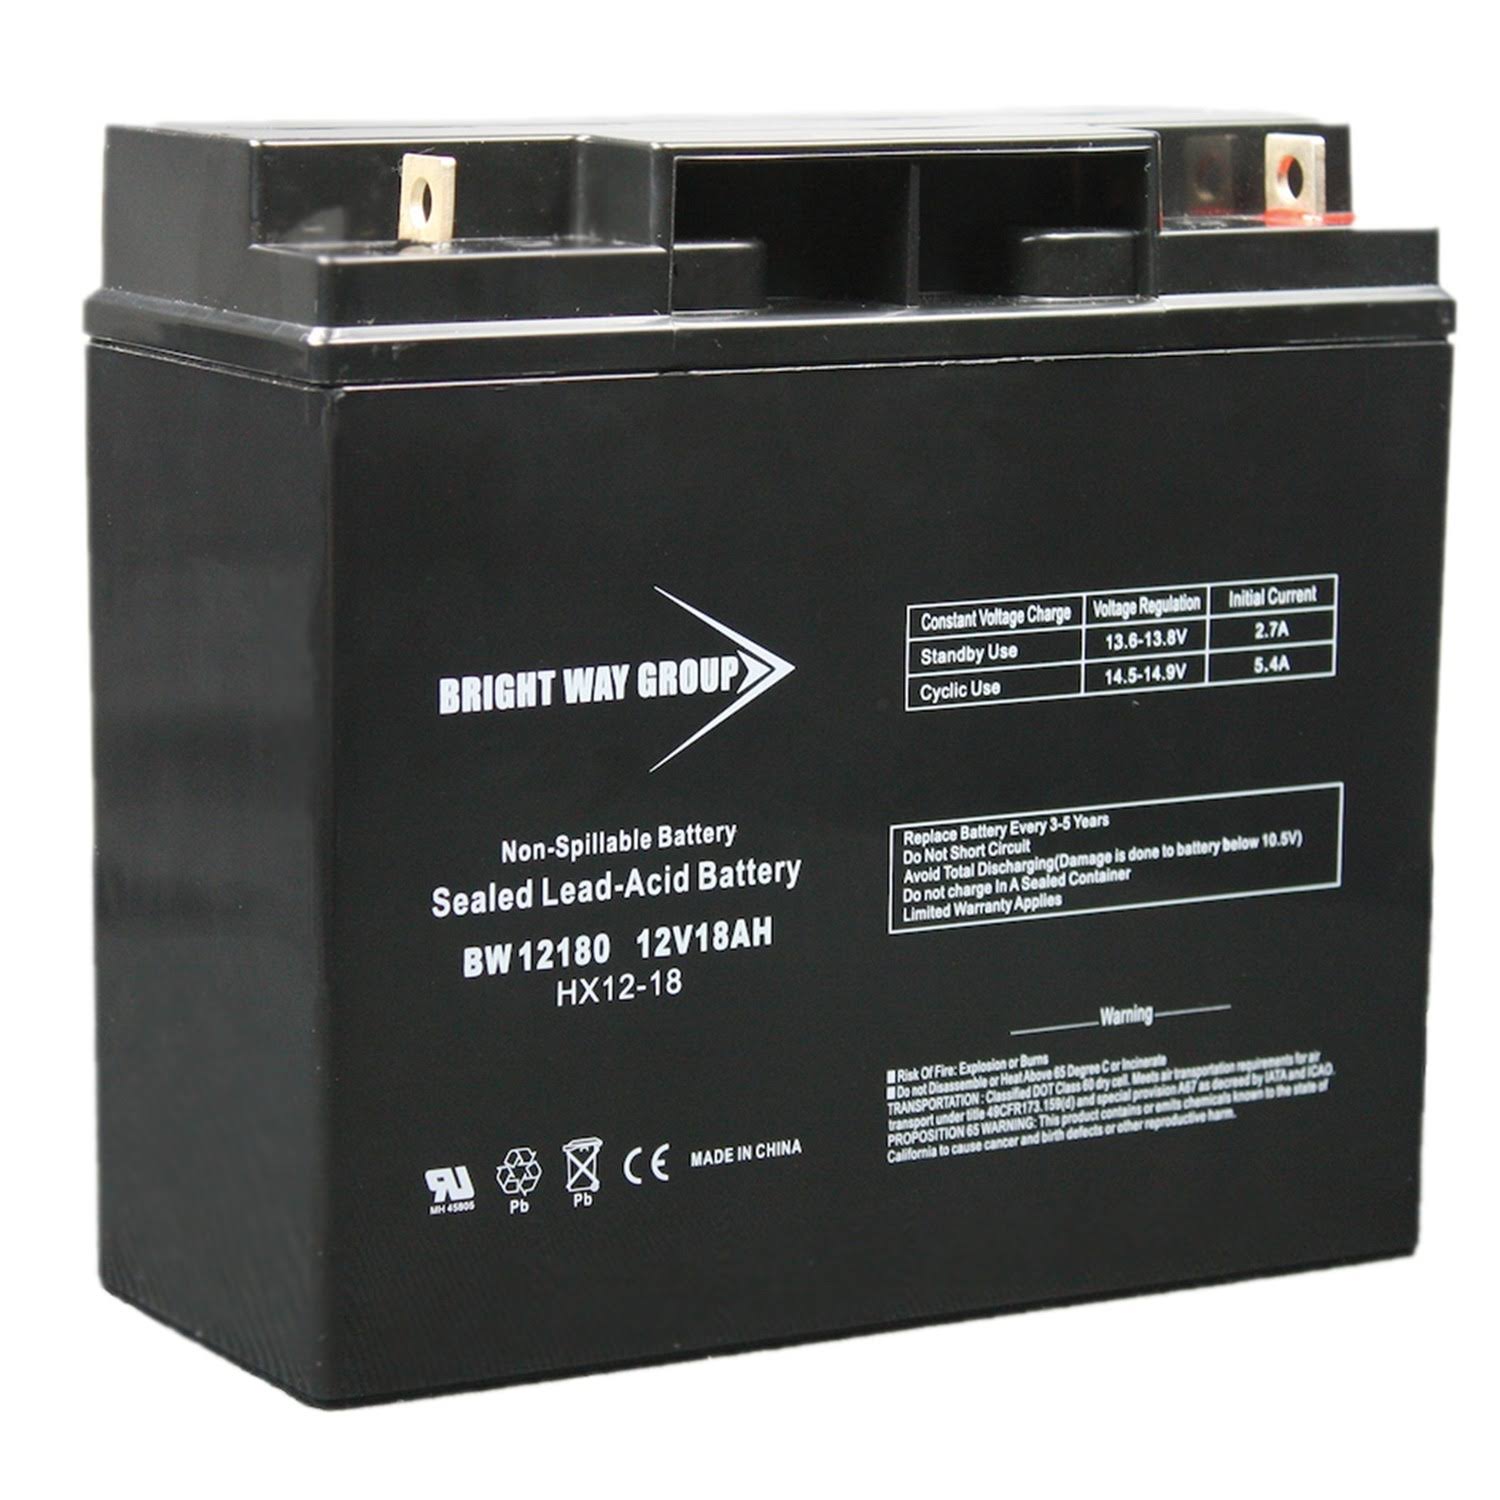 BWG 12180 NB Battery - Bright Way Group BW 12180 NB (0121)